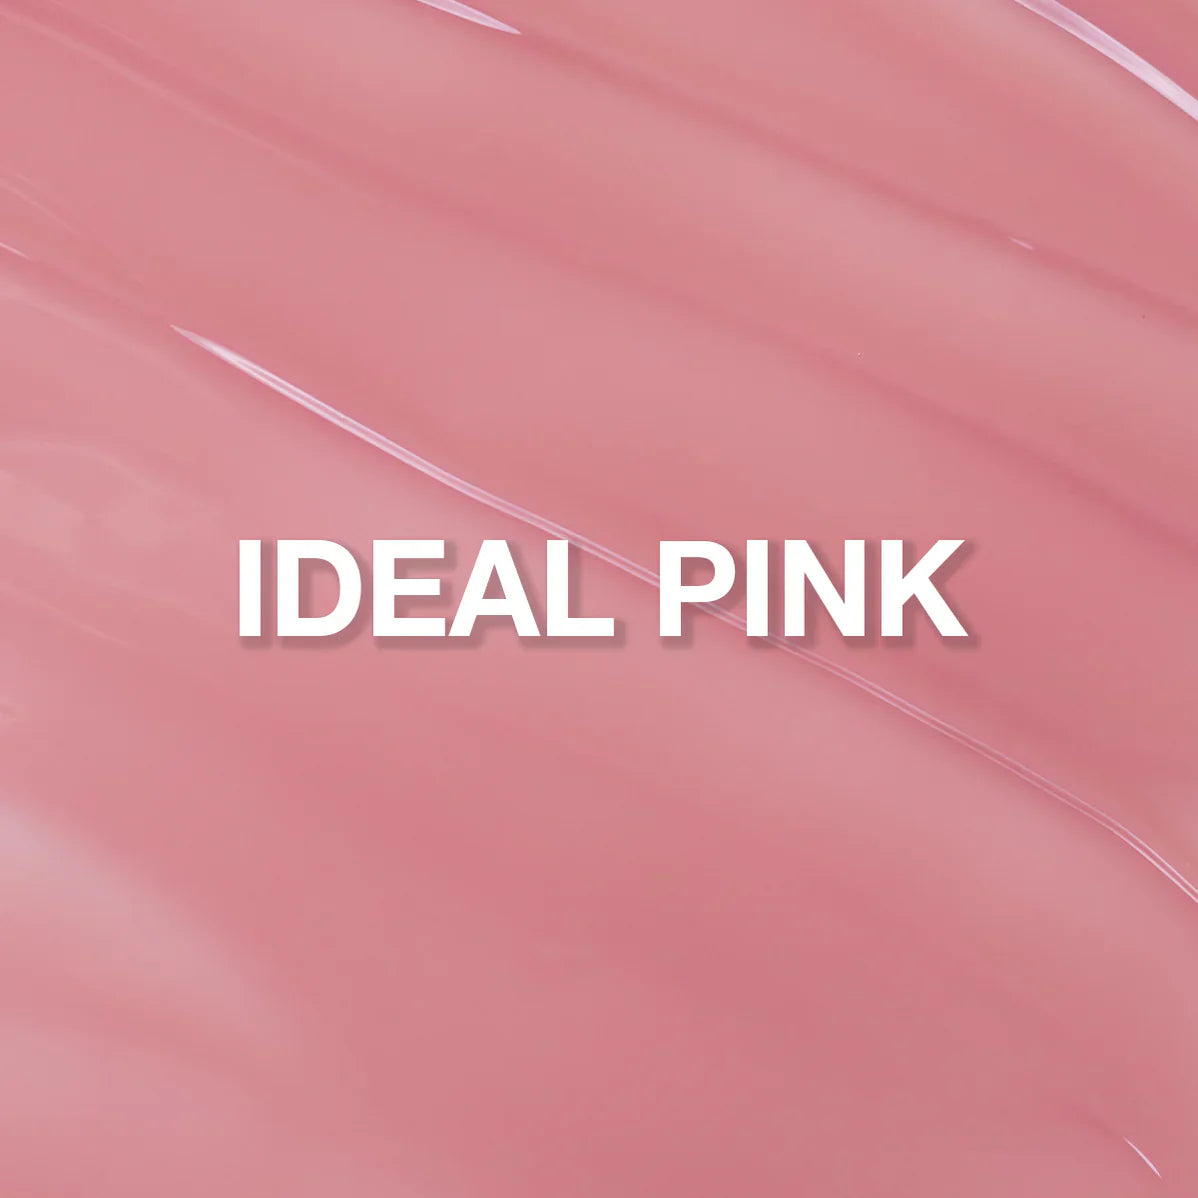 Ideal Pink Extreme Lexy Line Gel